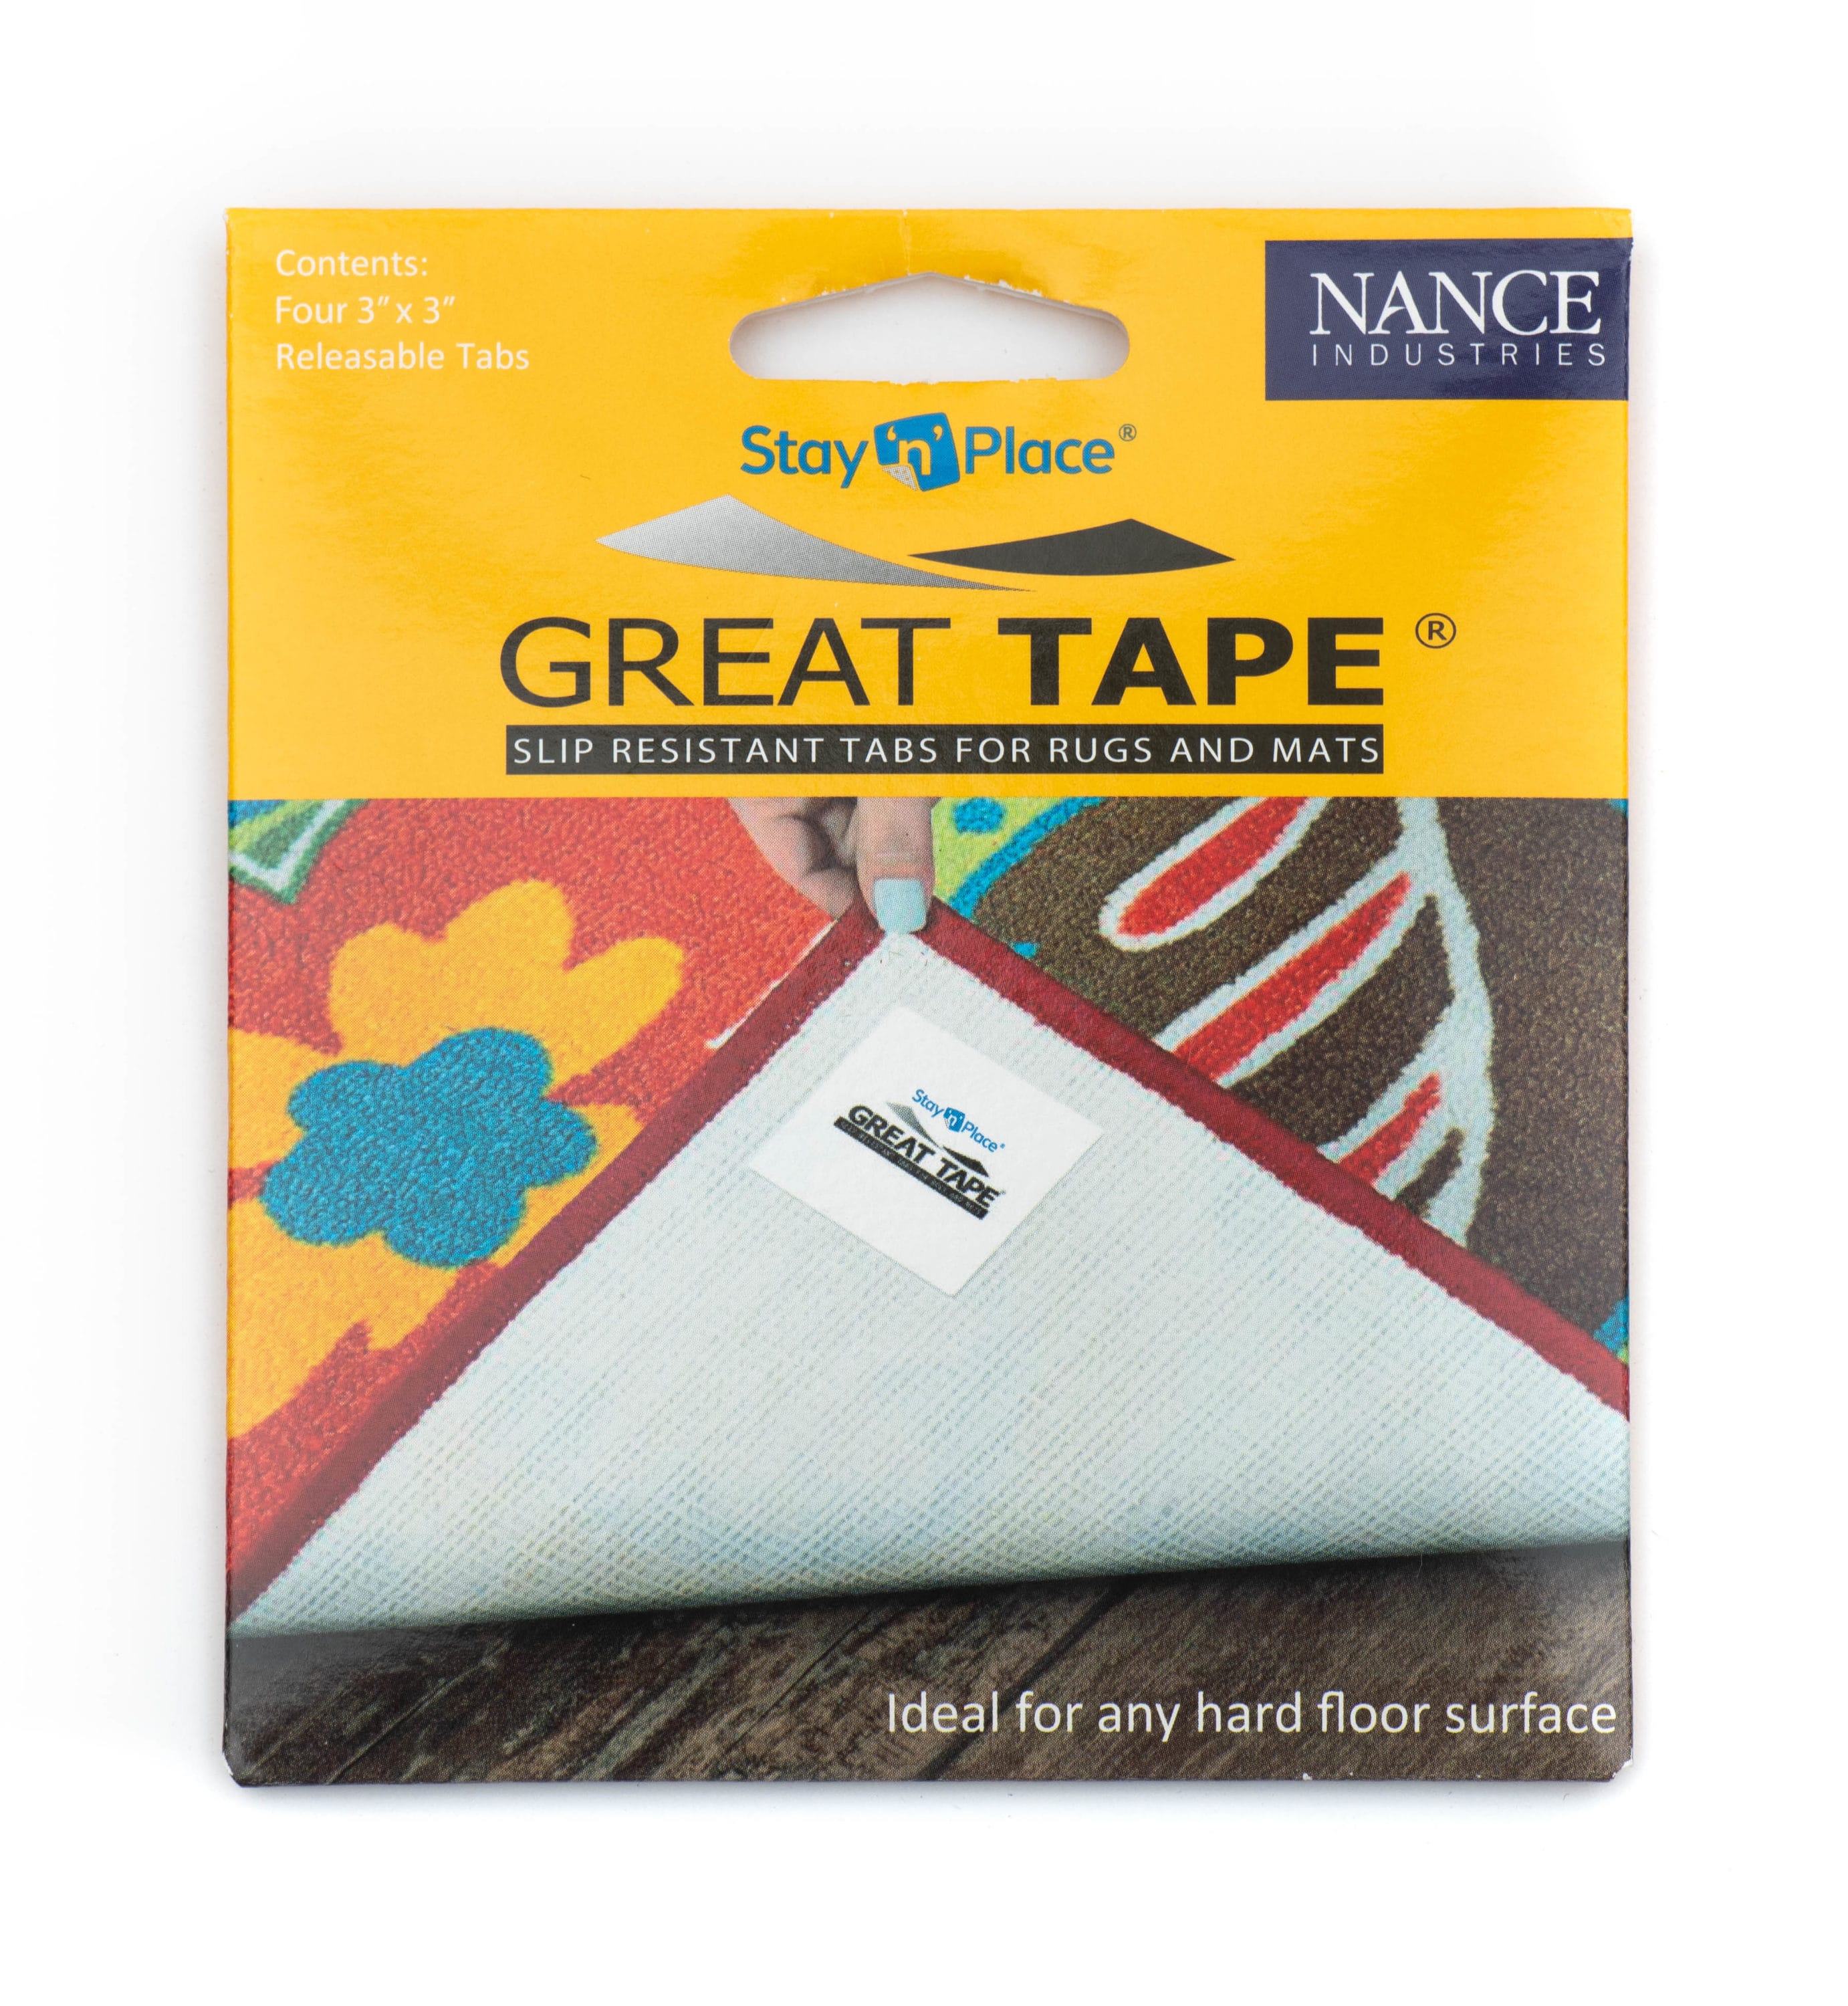 Stay 'n' Place 4 pack Skid-Resistant Non Slip 3" x 3" Tabs Rug Gripper Mat Tape 